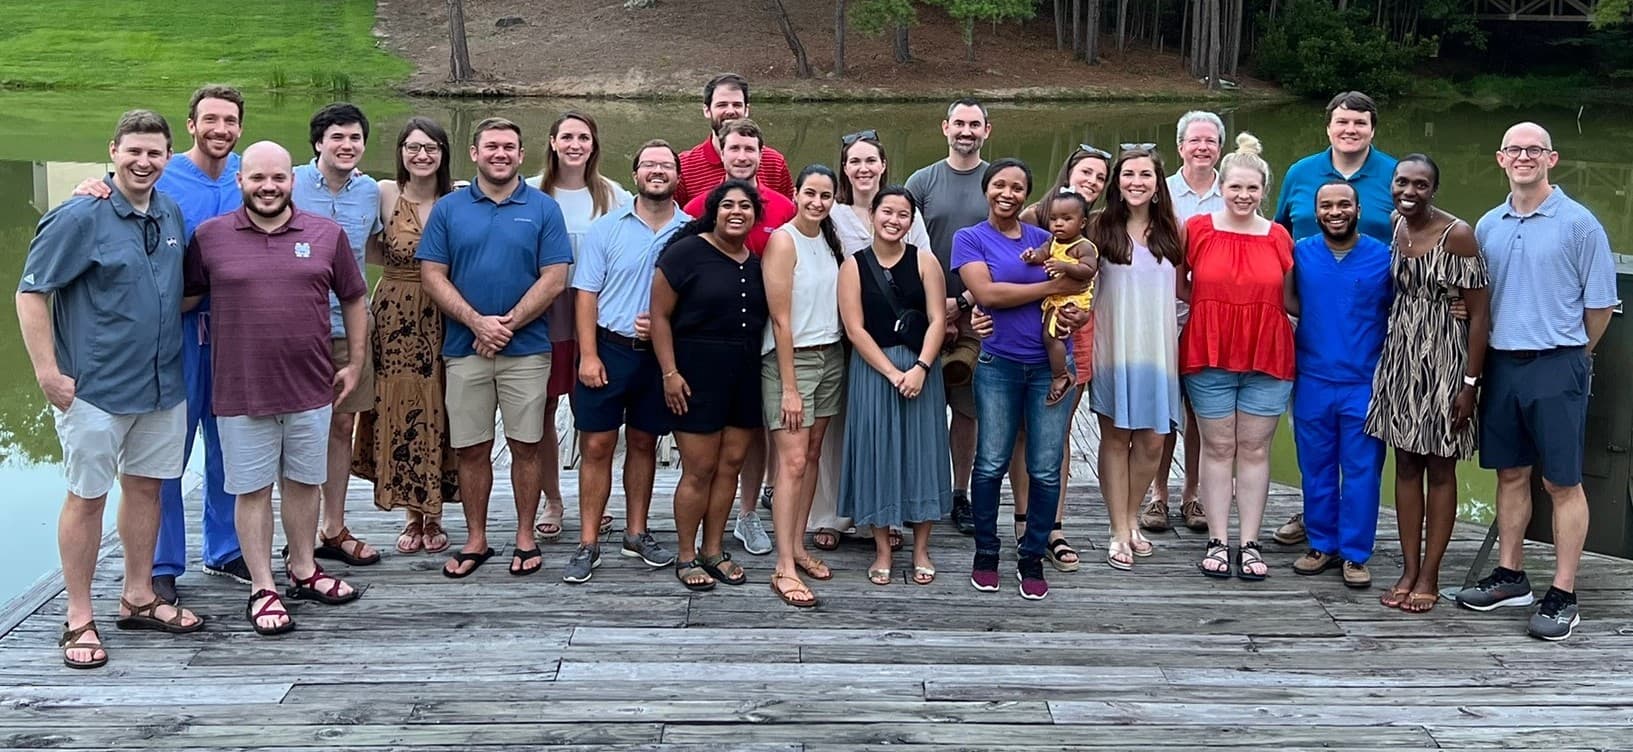 Group picture of Med-Peds students and faculty at dock with a lake in the background.